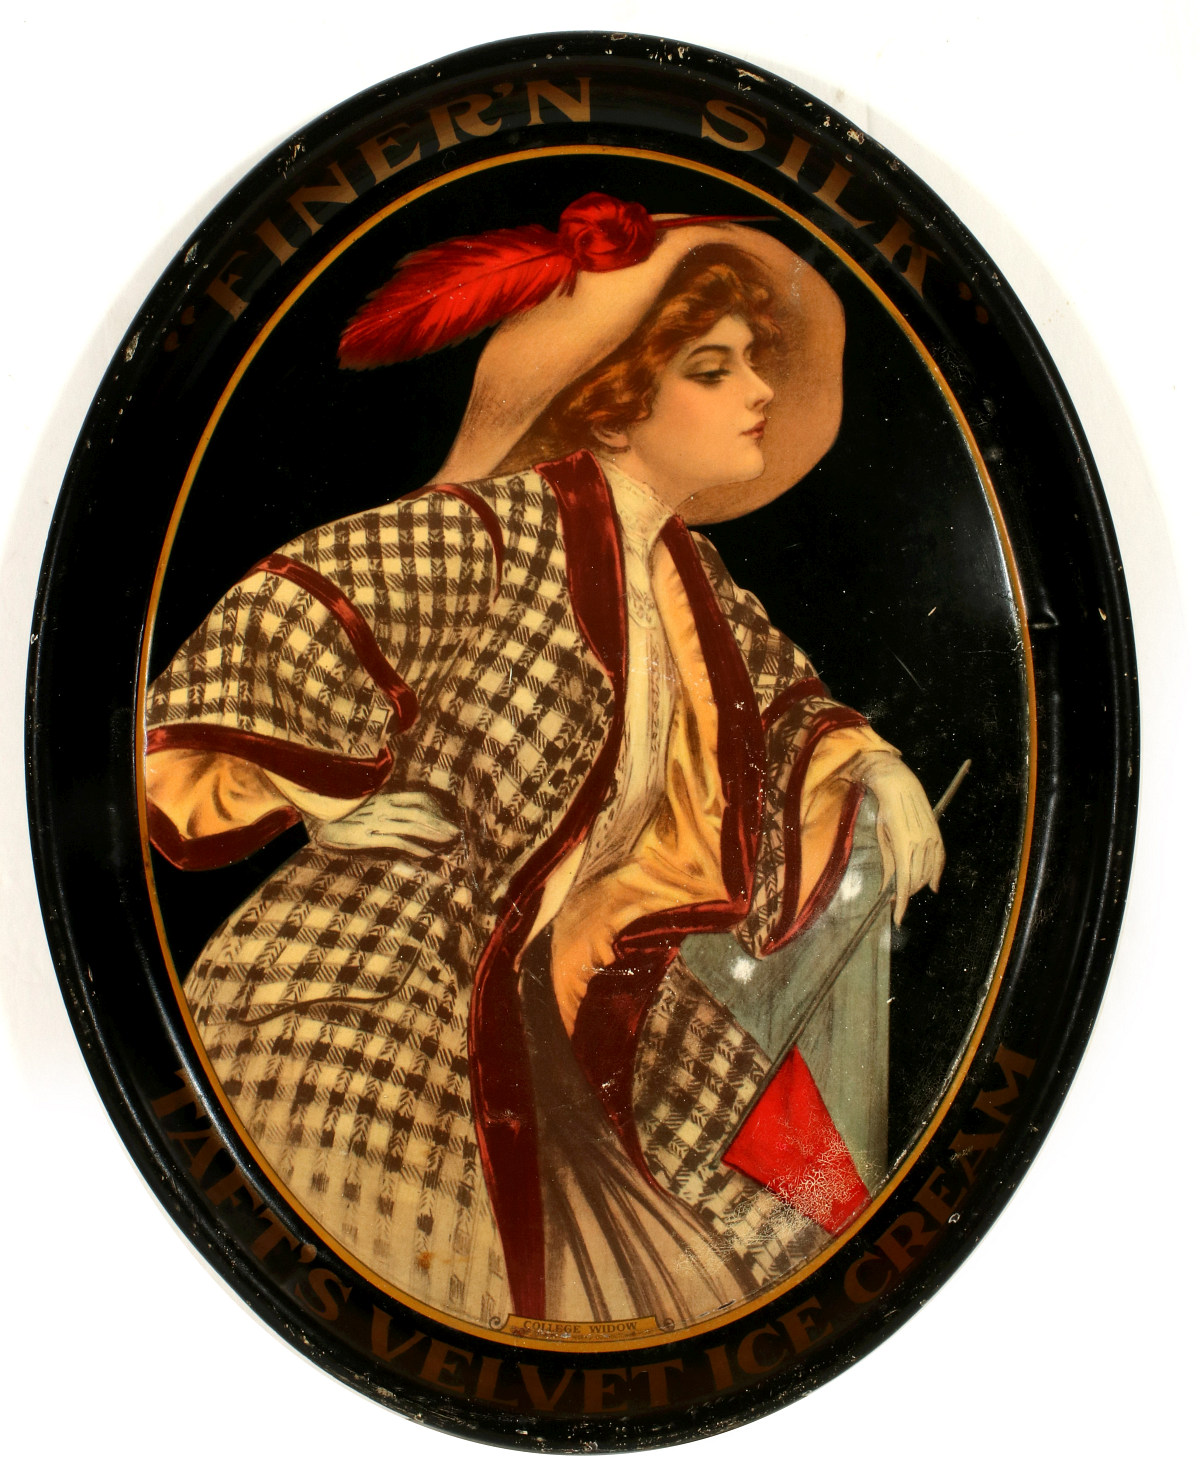 A 1913 'COLLEGE WIDOW' ICE CREAM ADVERTISING SIGN